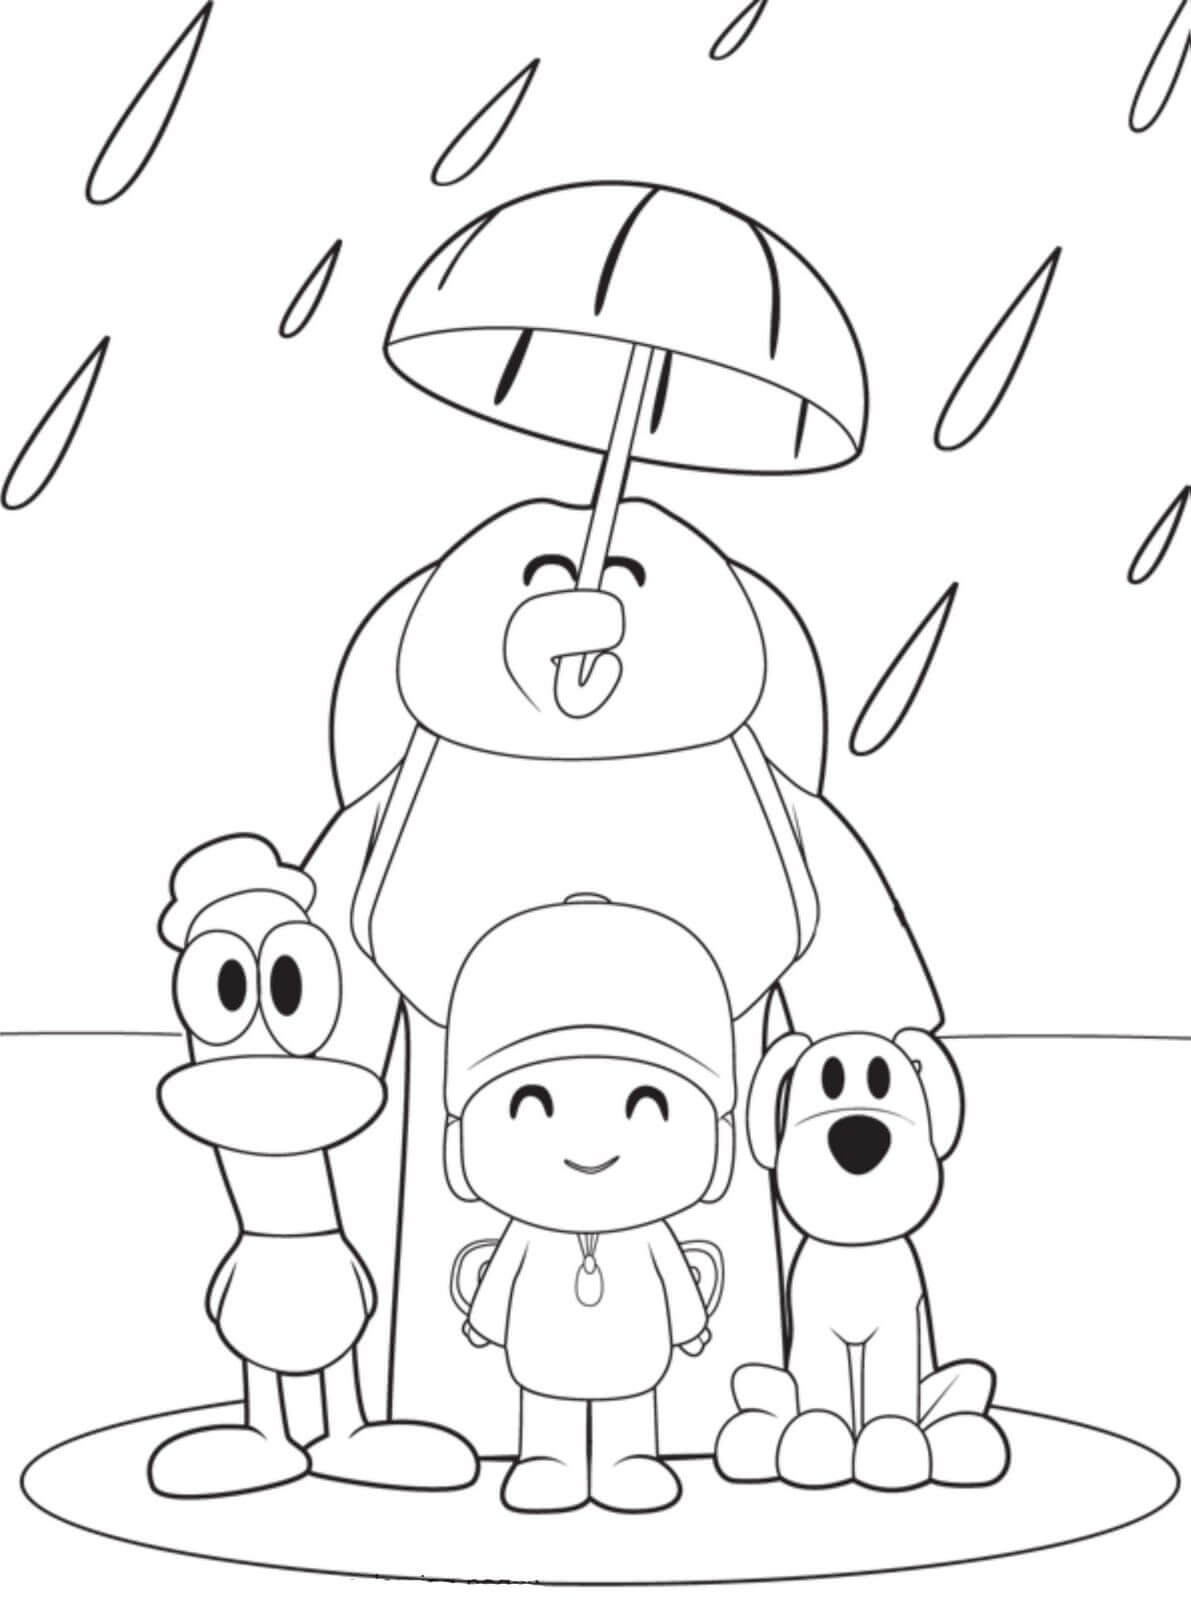 Pocoyo And Friends Standing in The Rain